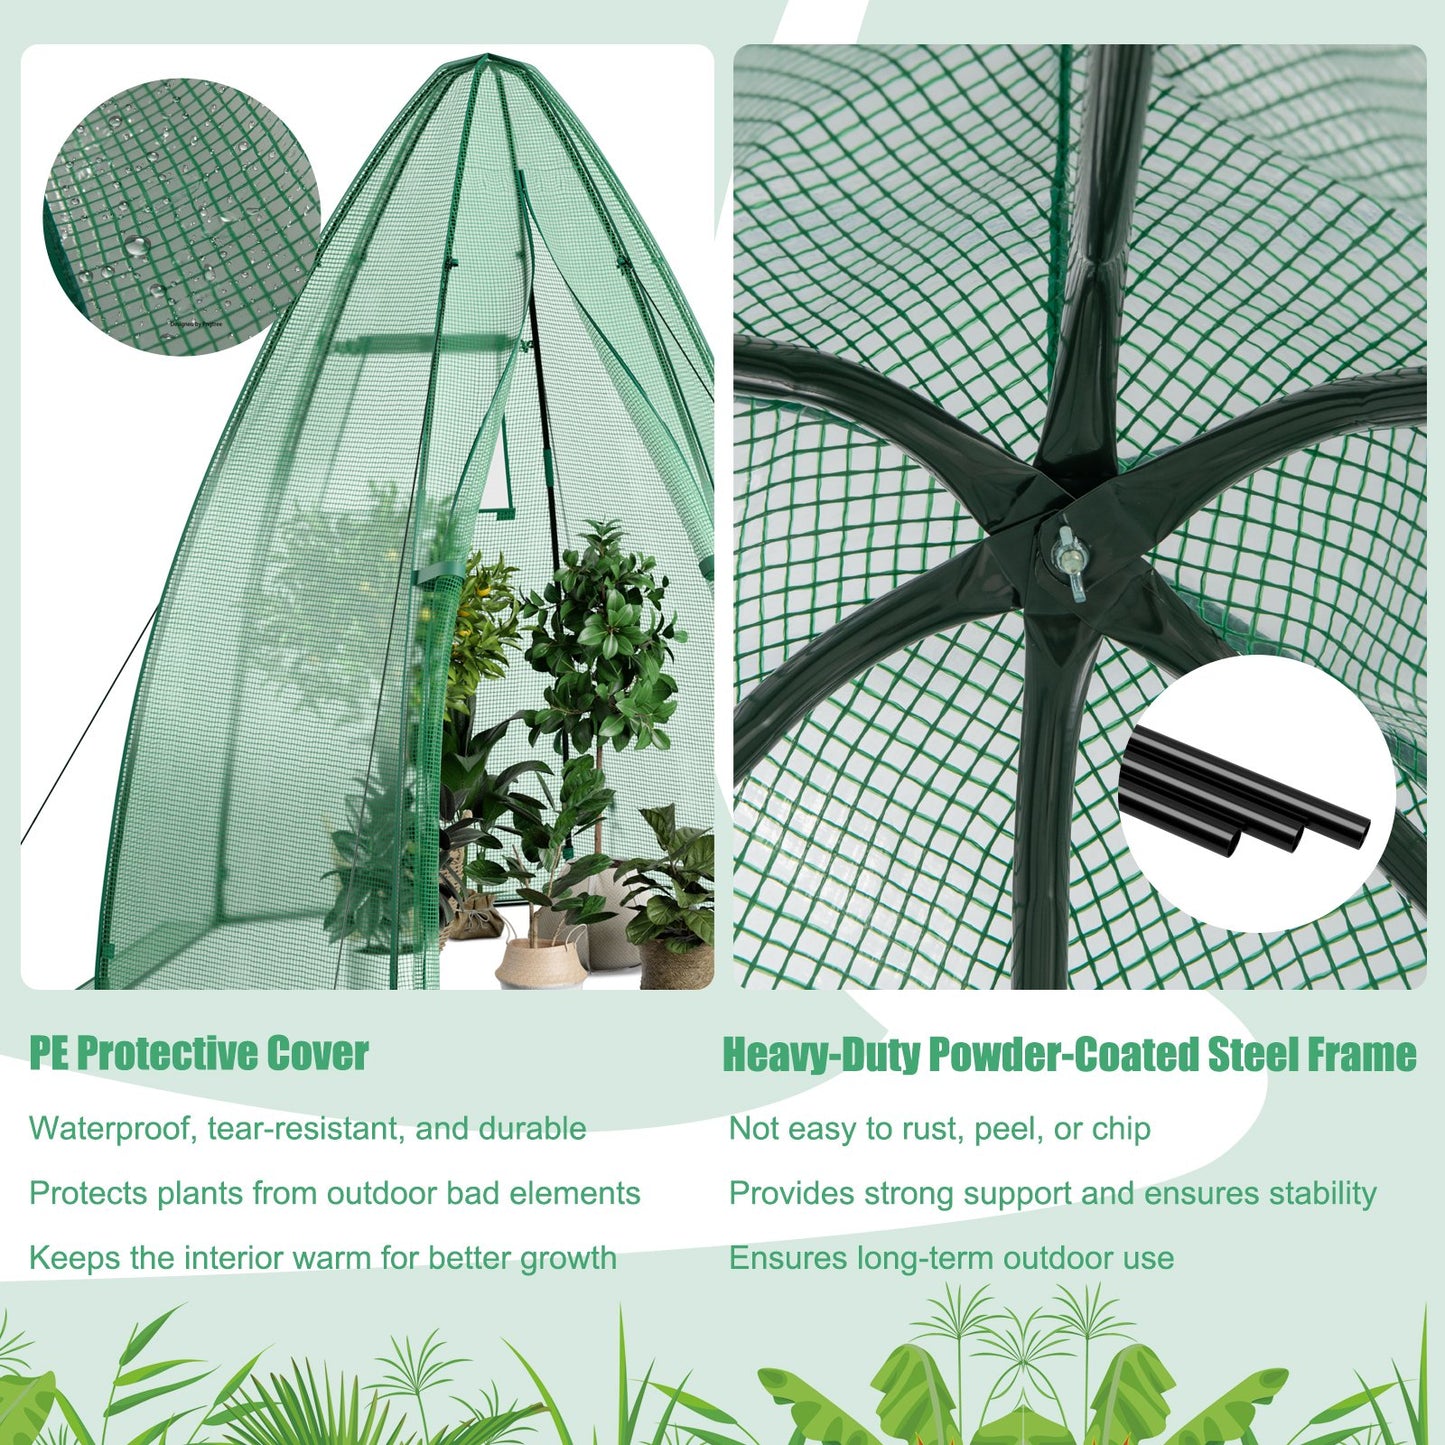 5.5 x 5.5 x 6 Feet Portable Mini Greenhouse with All-Weather PE Cover, Green at Gallery Canada